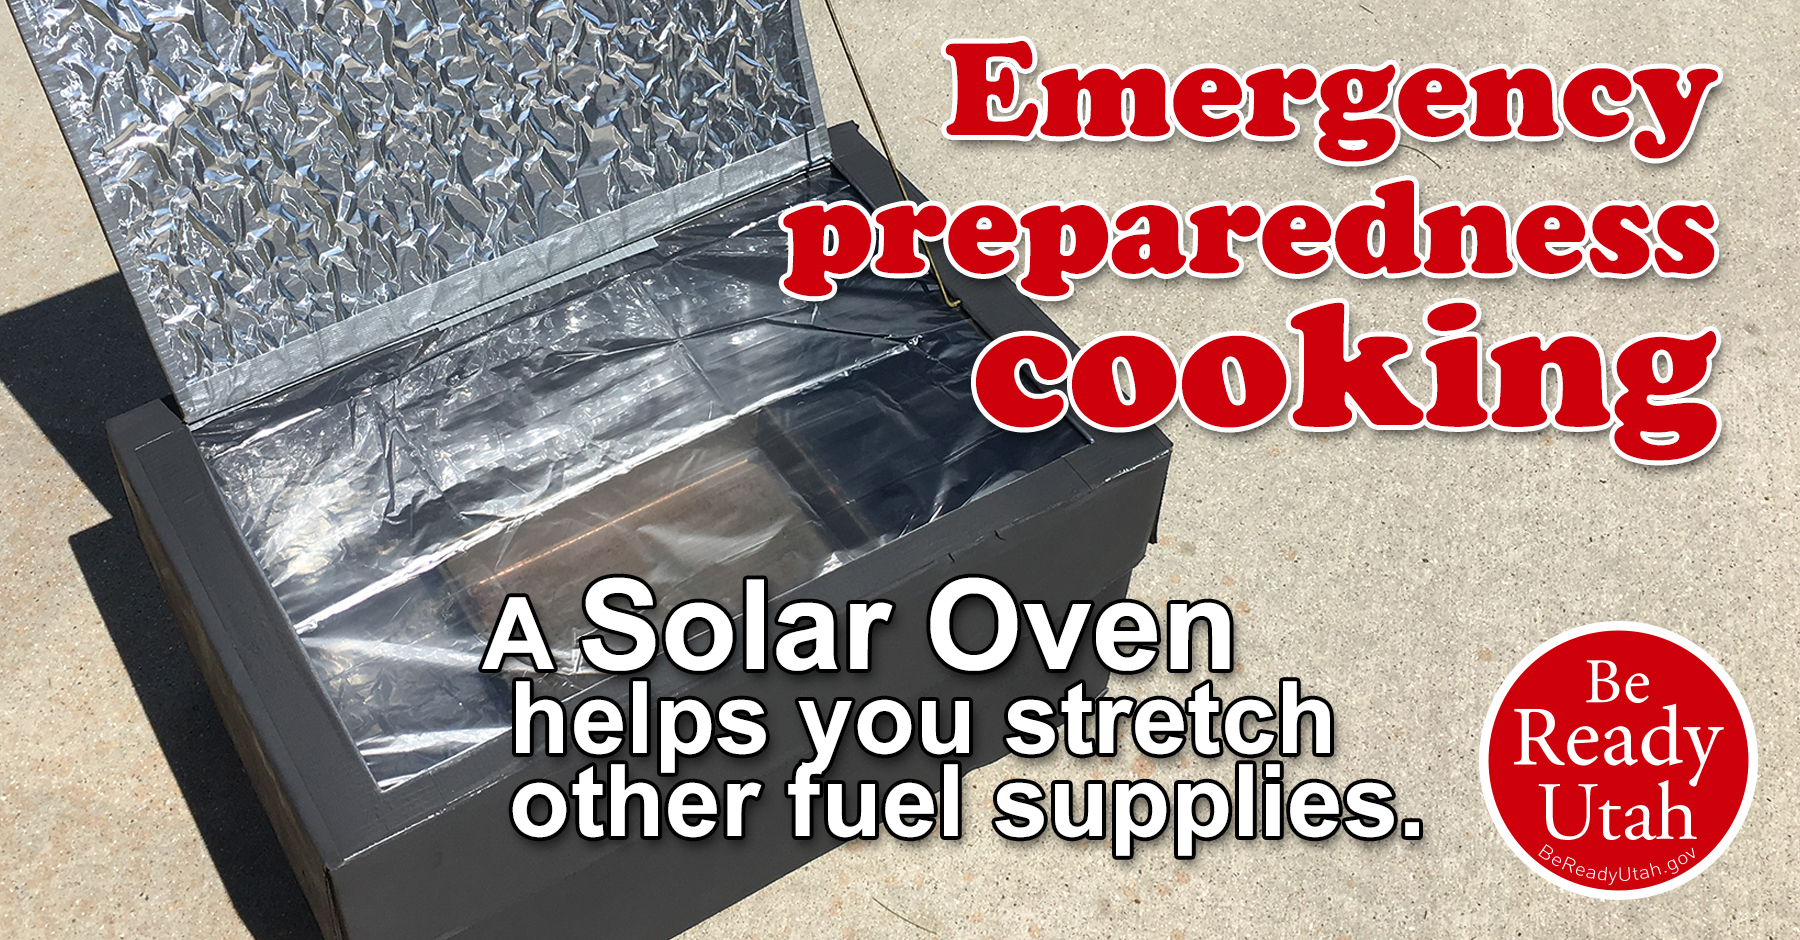 Solar Oven Stretches Other Fuels